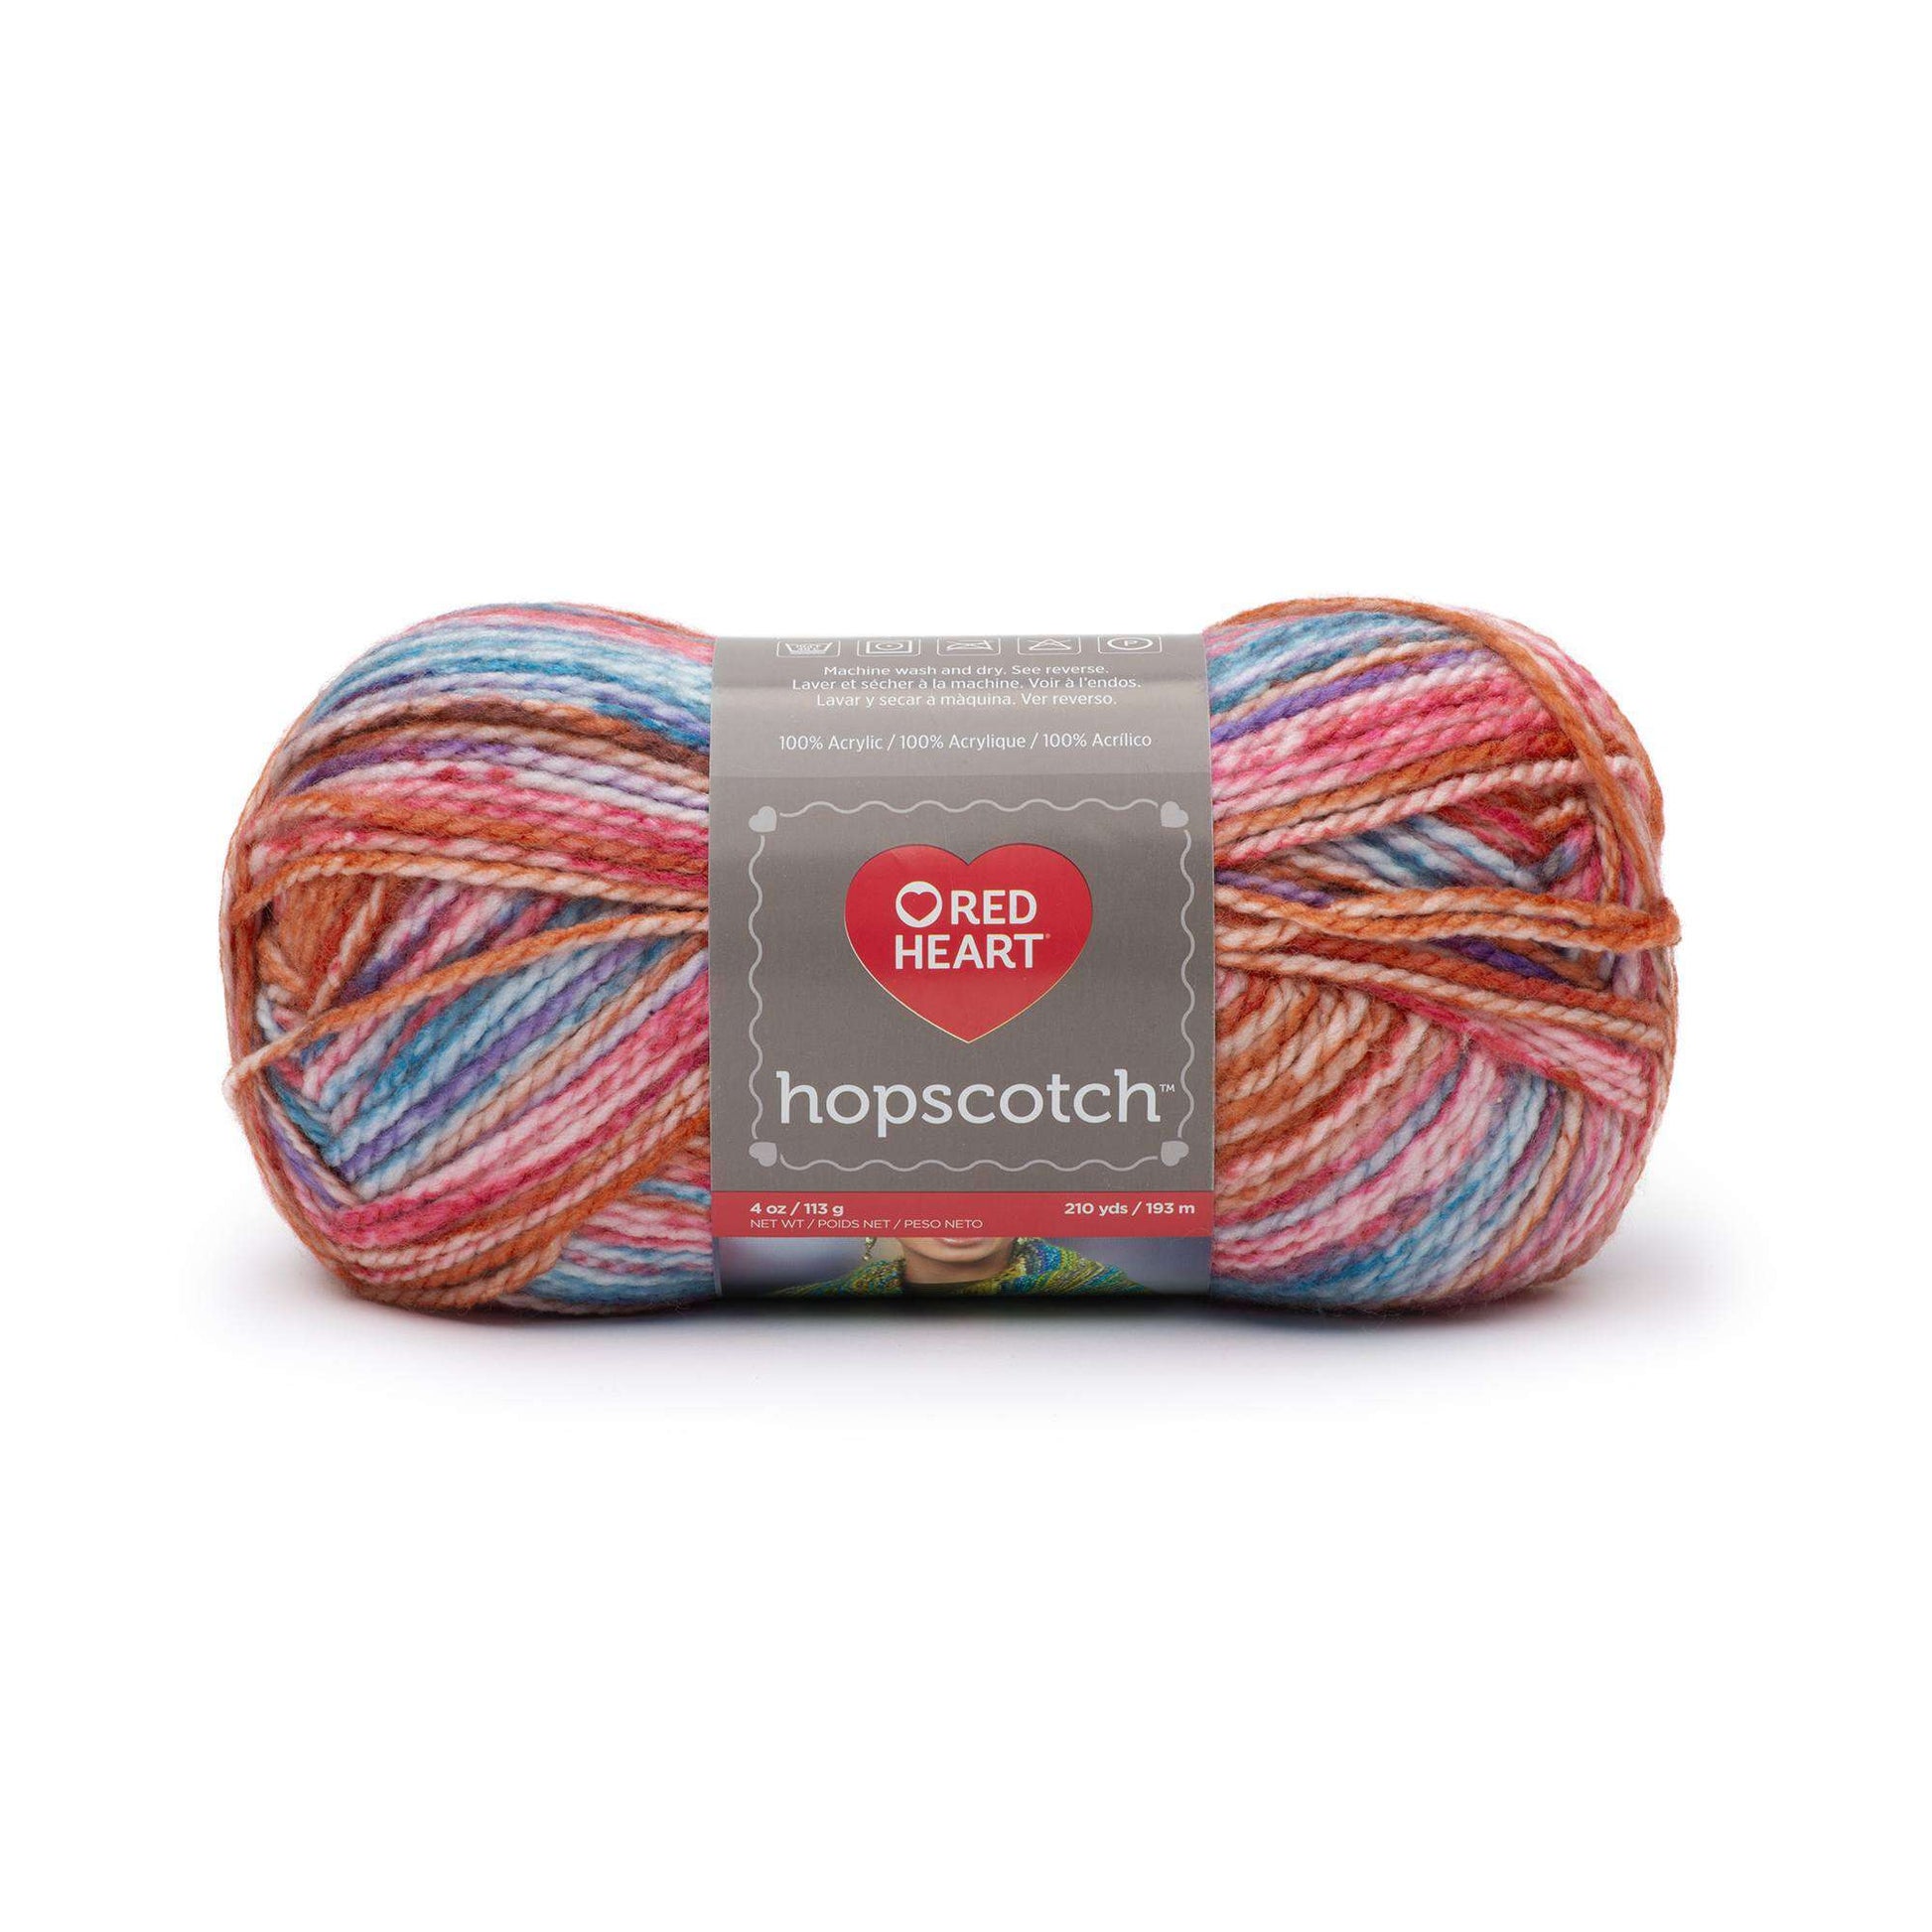 Red Heart Hopscotch Yarn - Discontinued Shades